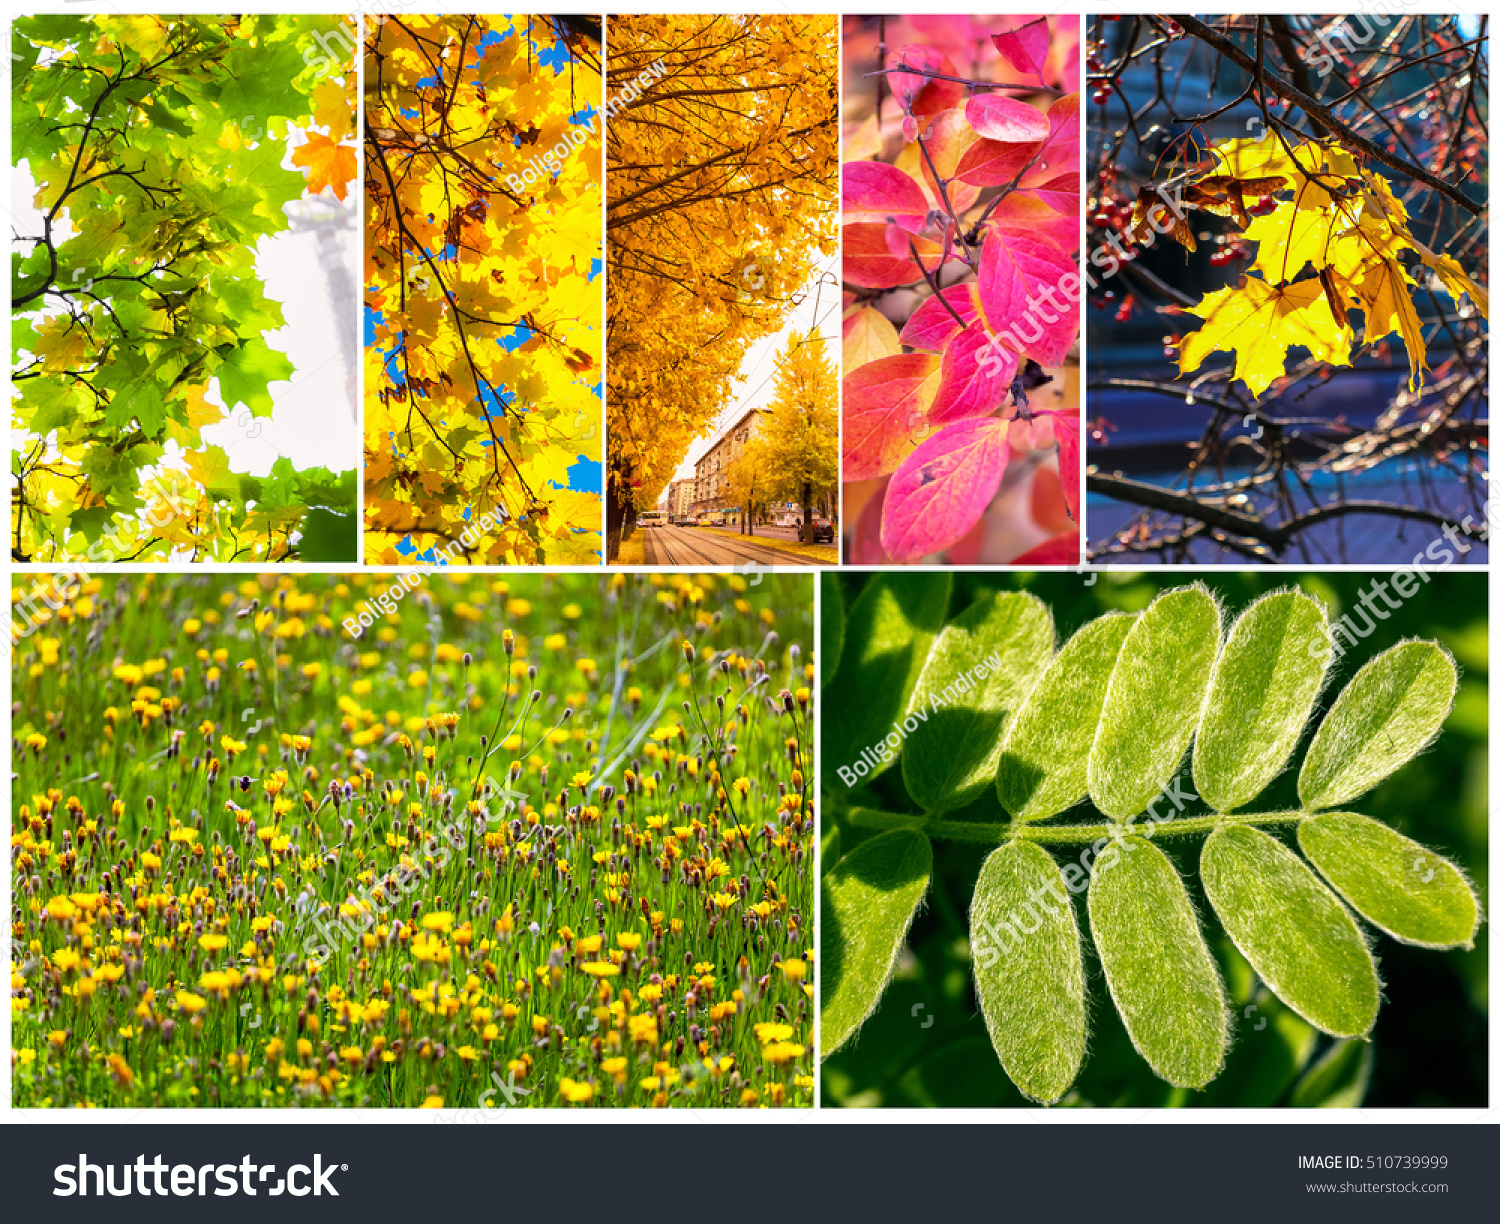 Set of various colorful leaves of trees and plants #510739999